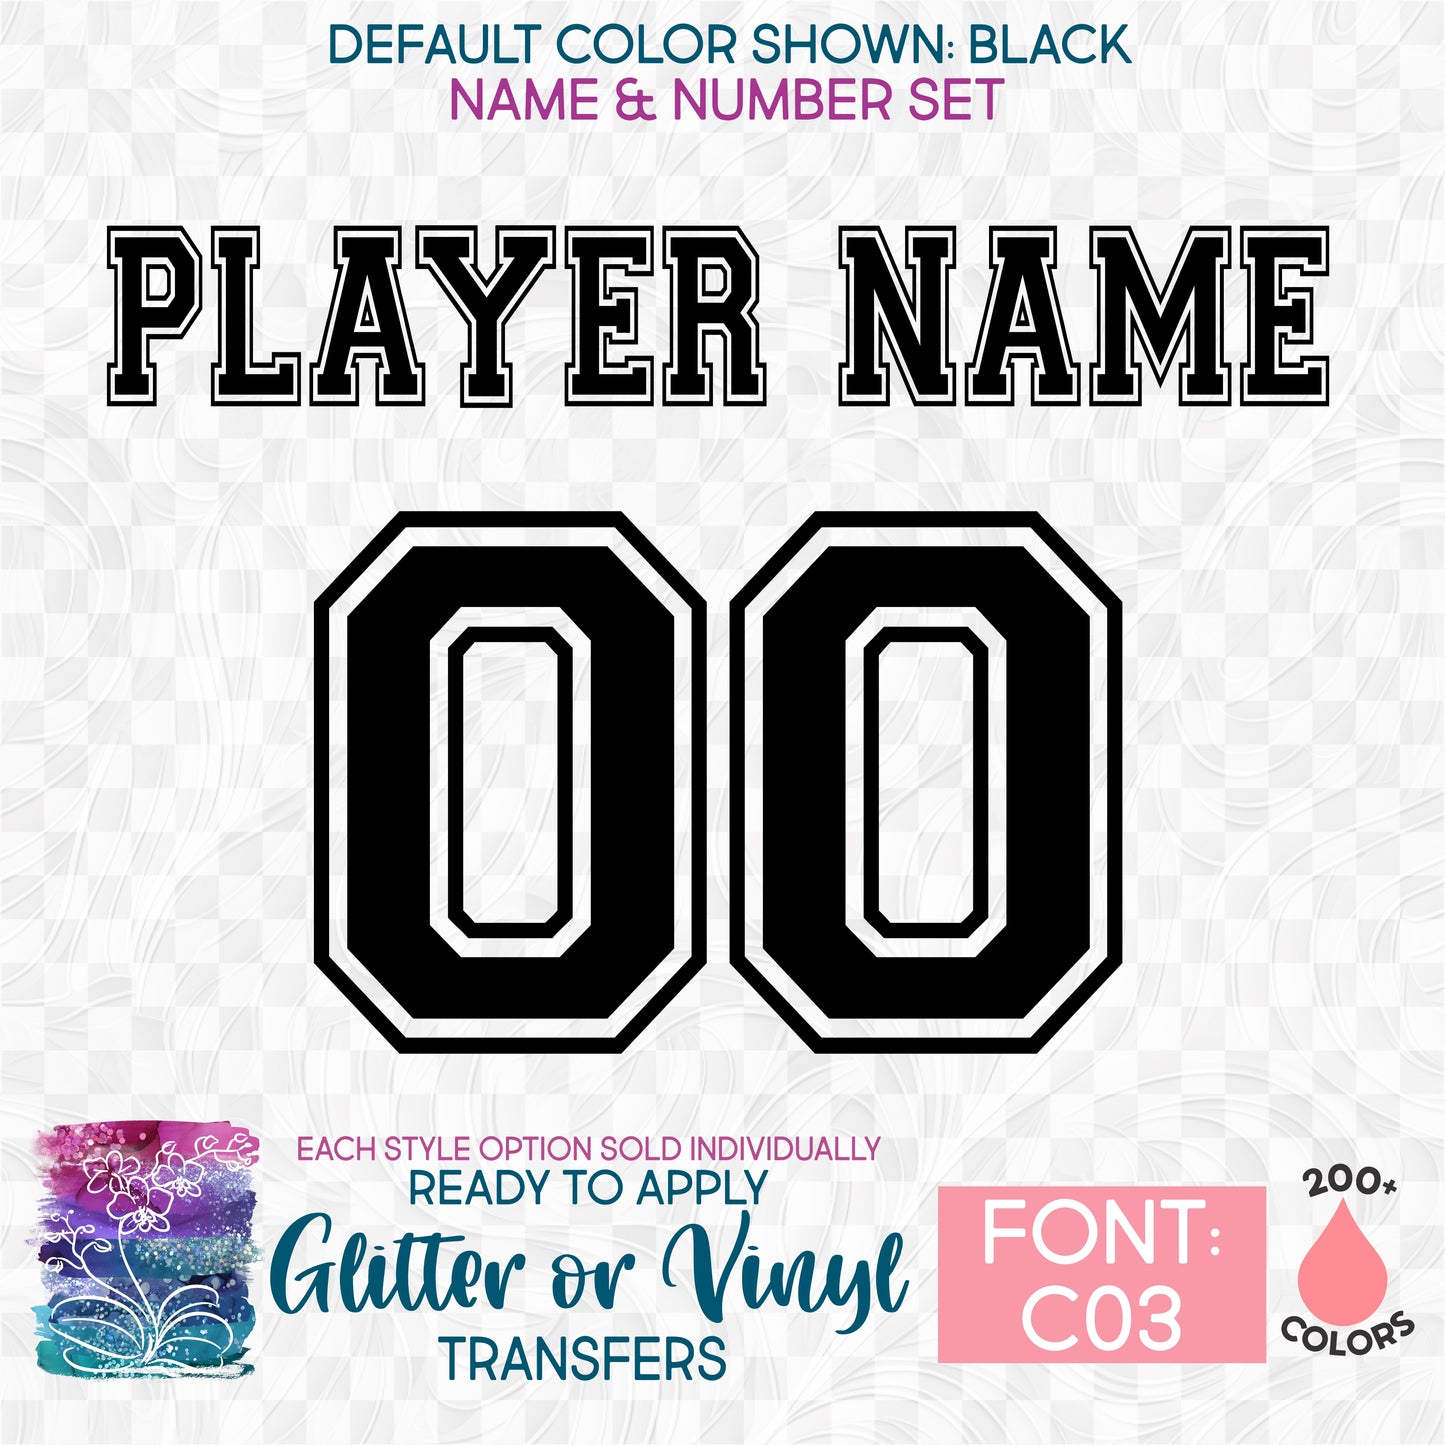 (s097-C03) Custom Player Perfect Name & Number Glitter or Vinyl Iron-On Transfer